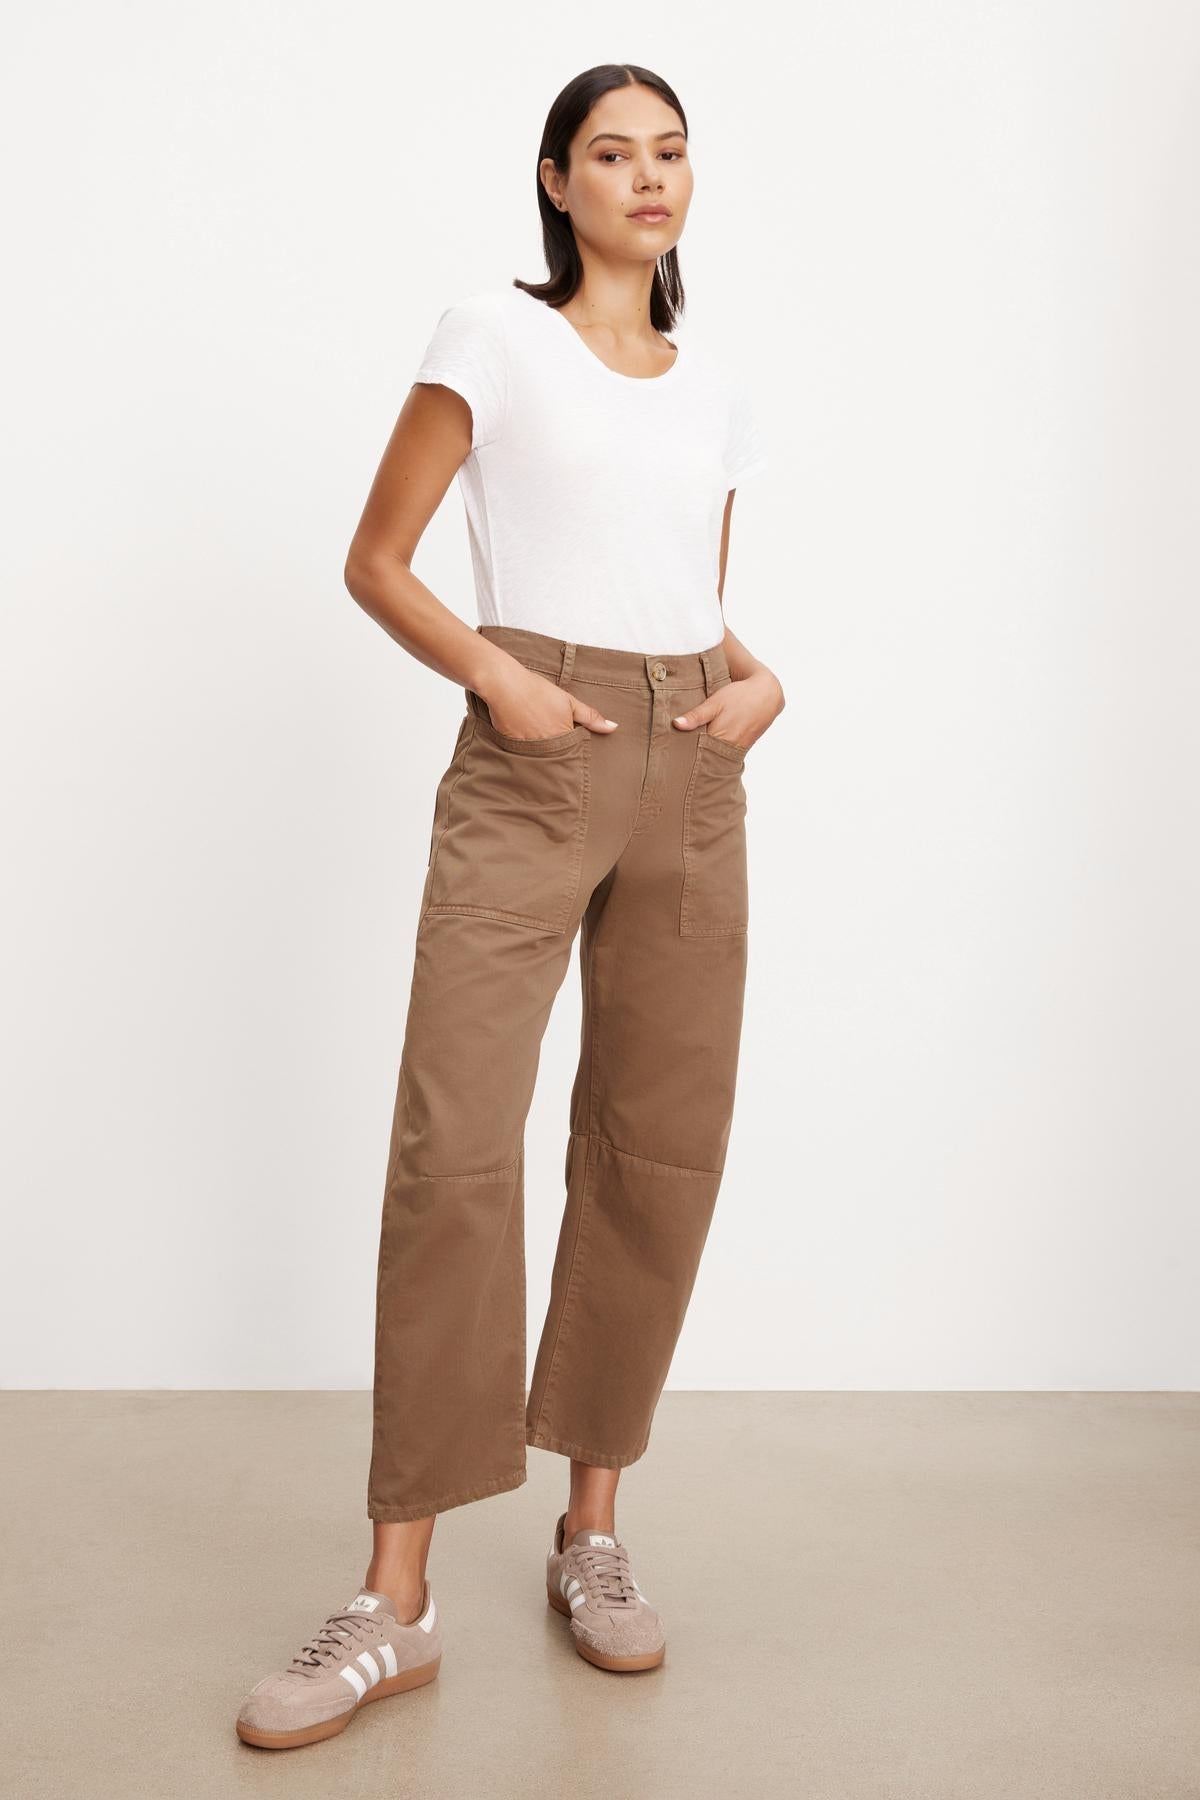 The model is wearing a white t-shirt and Velvet by Graham & Spencer brown cropped pants with patch pockets.-36001385382081